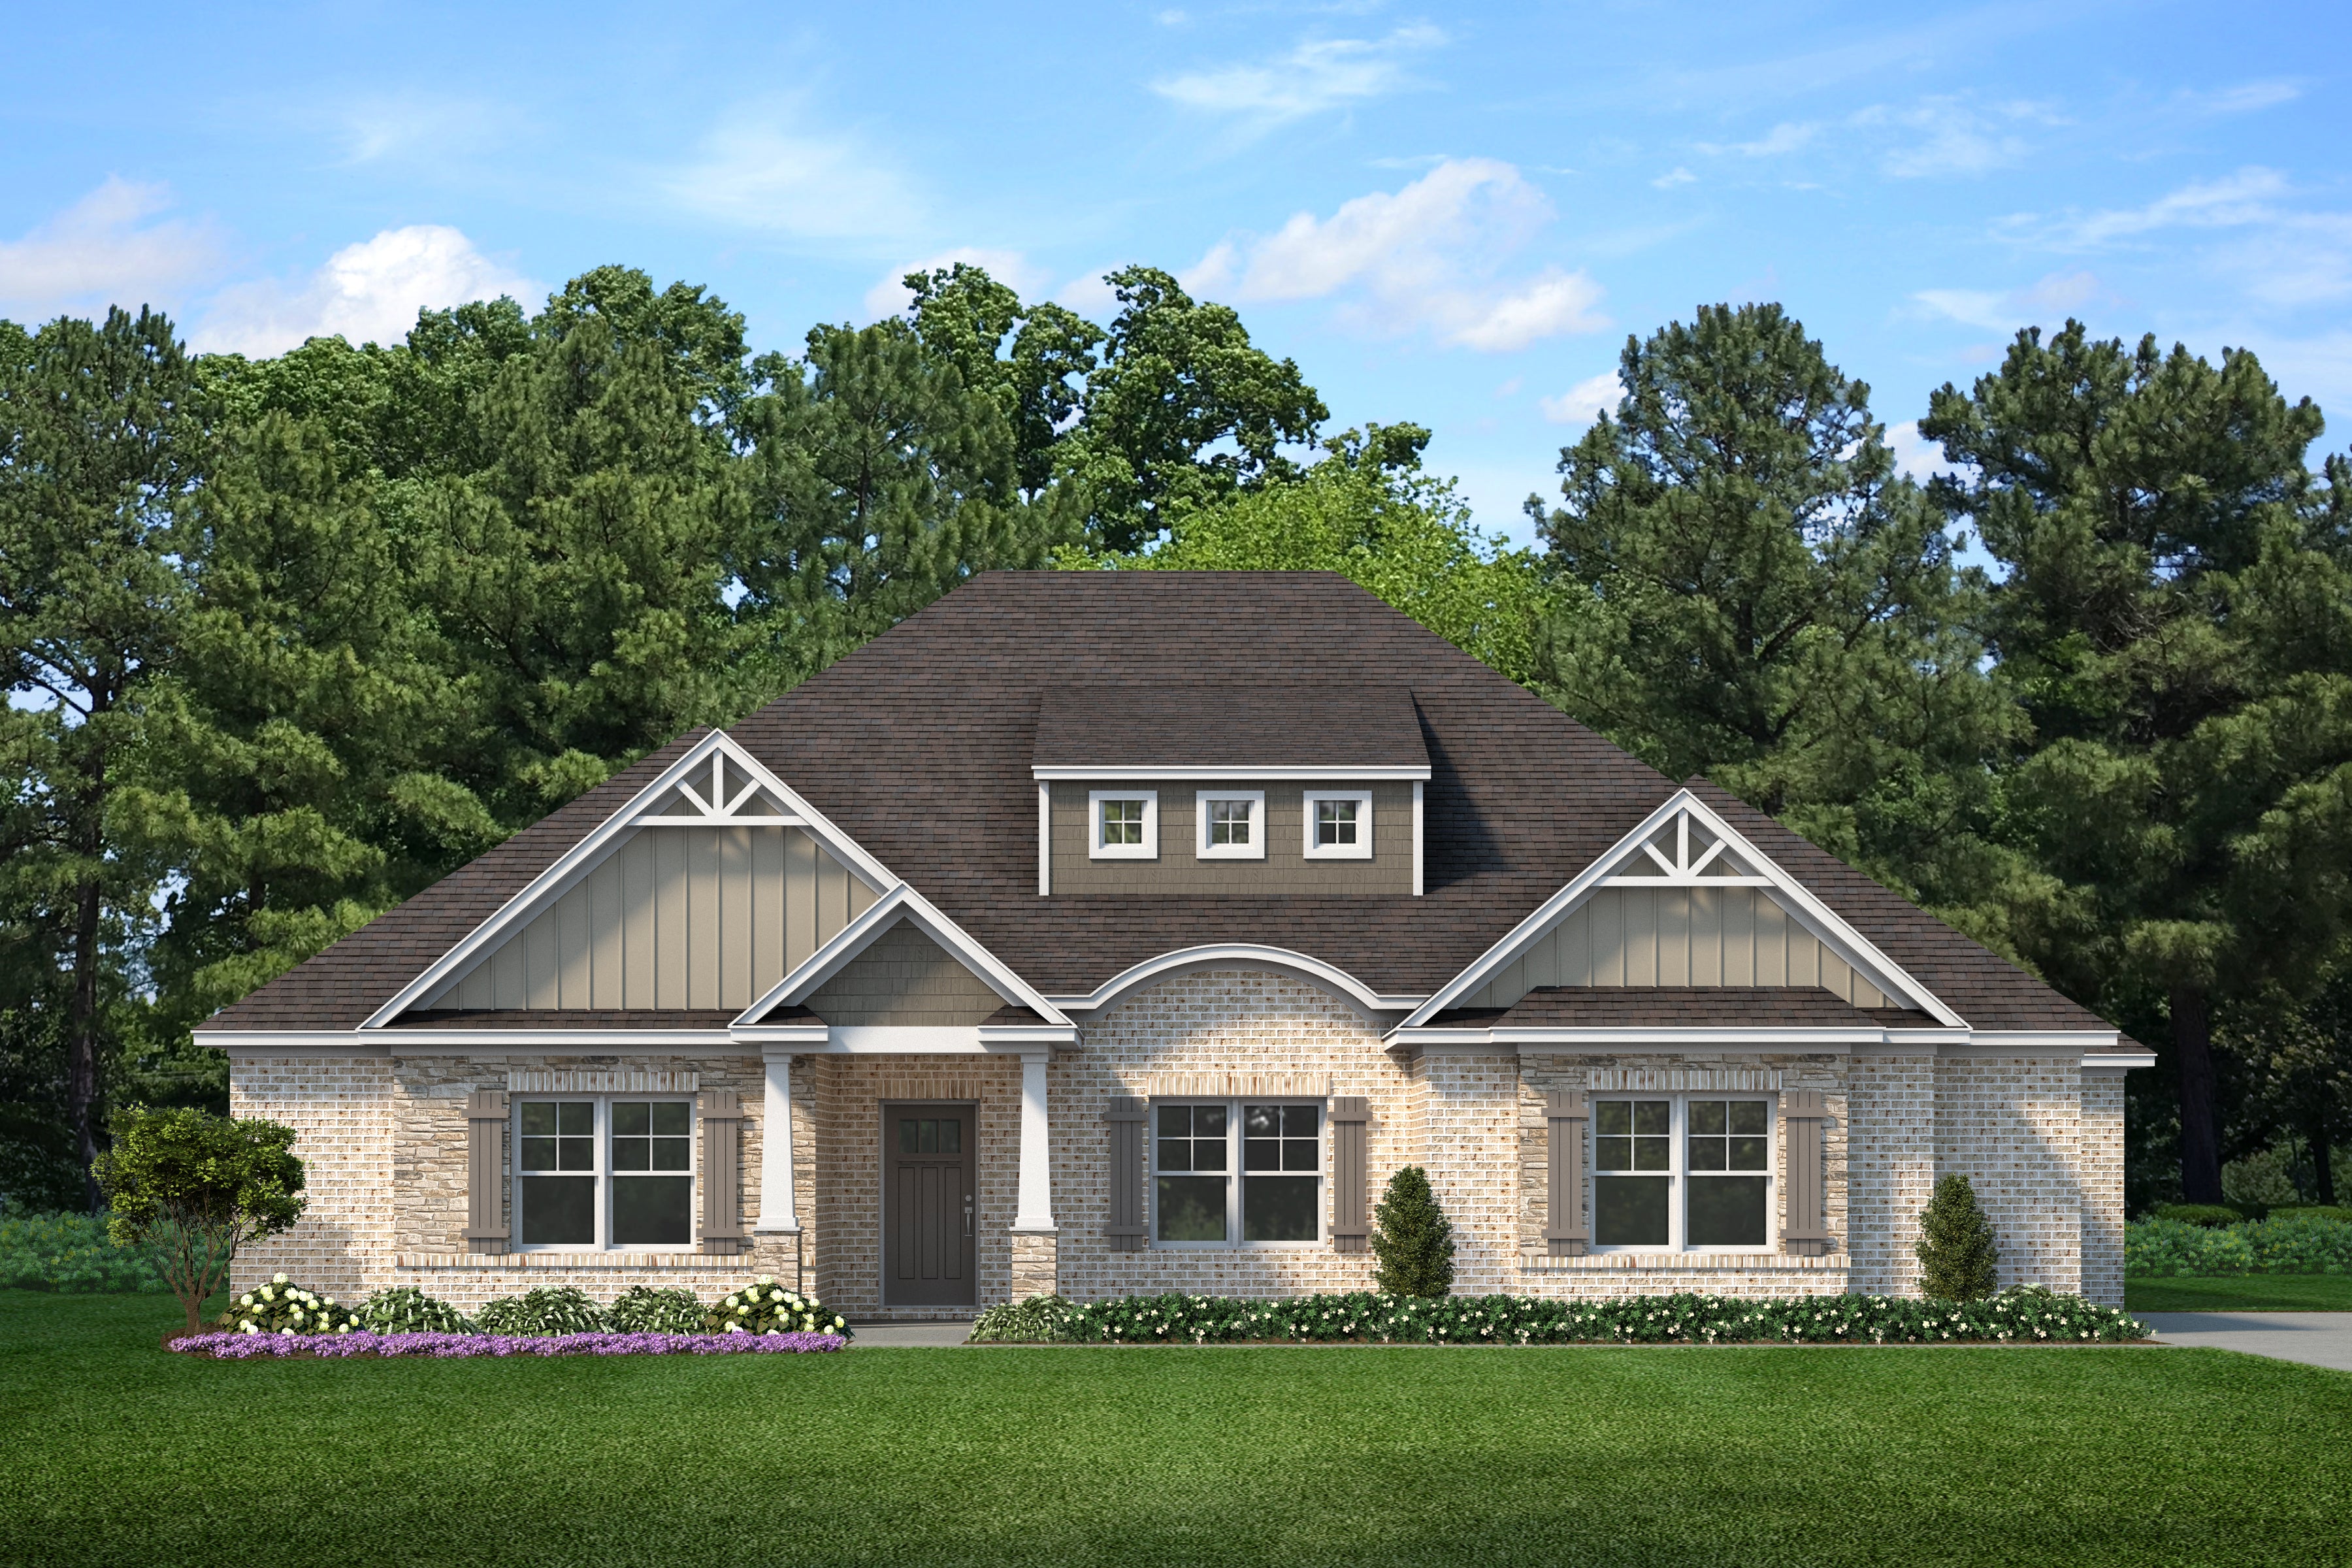 Elevation C. 2,931sf New Home in Athens, AL